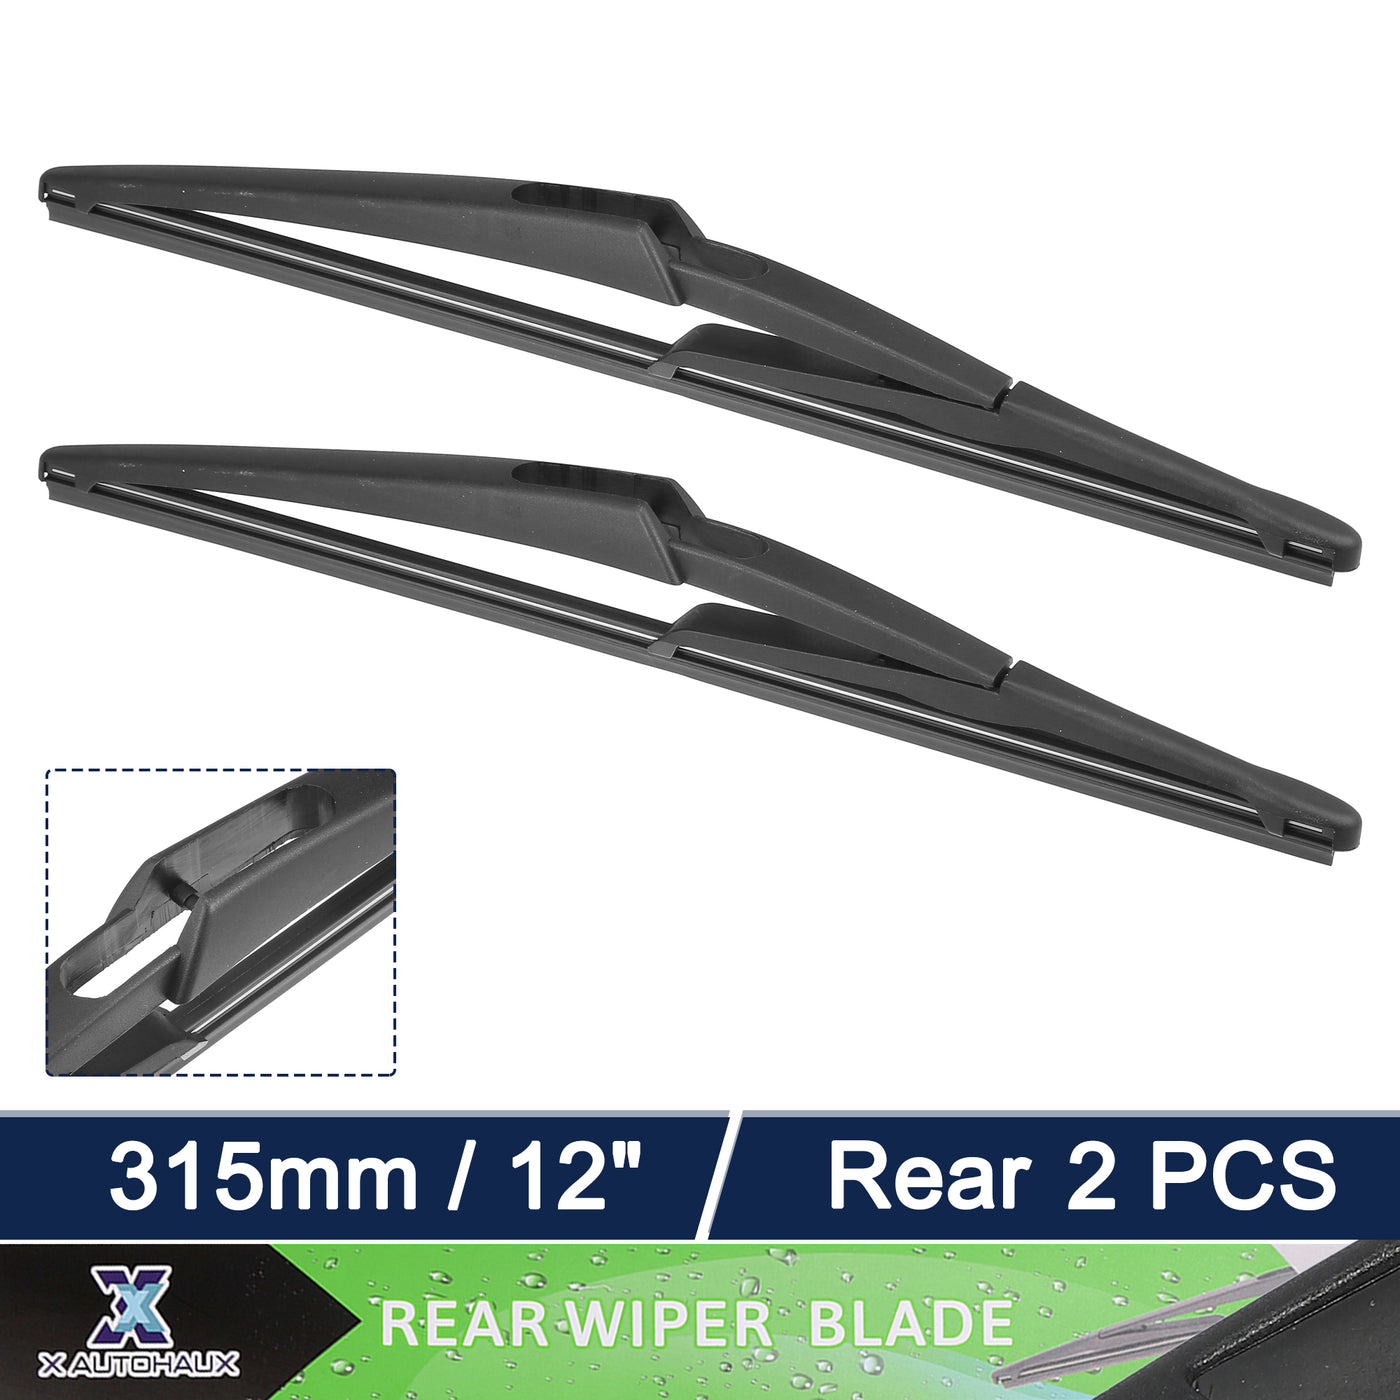 X AUTOHAUX 2pcs Rear Windshield Wiper Blade Replacement for Nissan Rogue 2009-2016 for Nissan Pathfinder 2015-2016 for Mercedes Benz A-Class W169 2004-2012